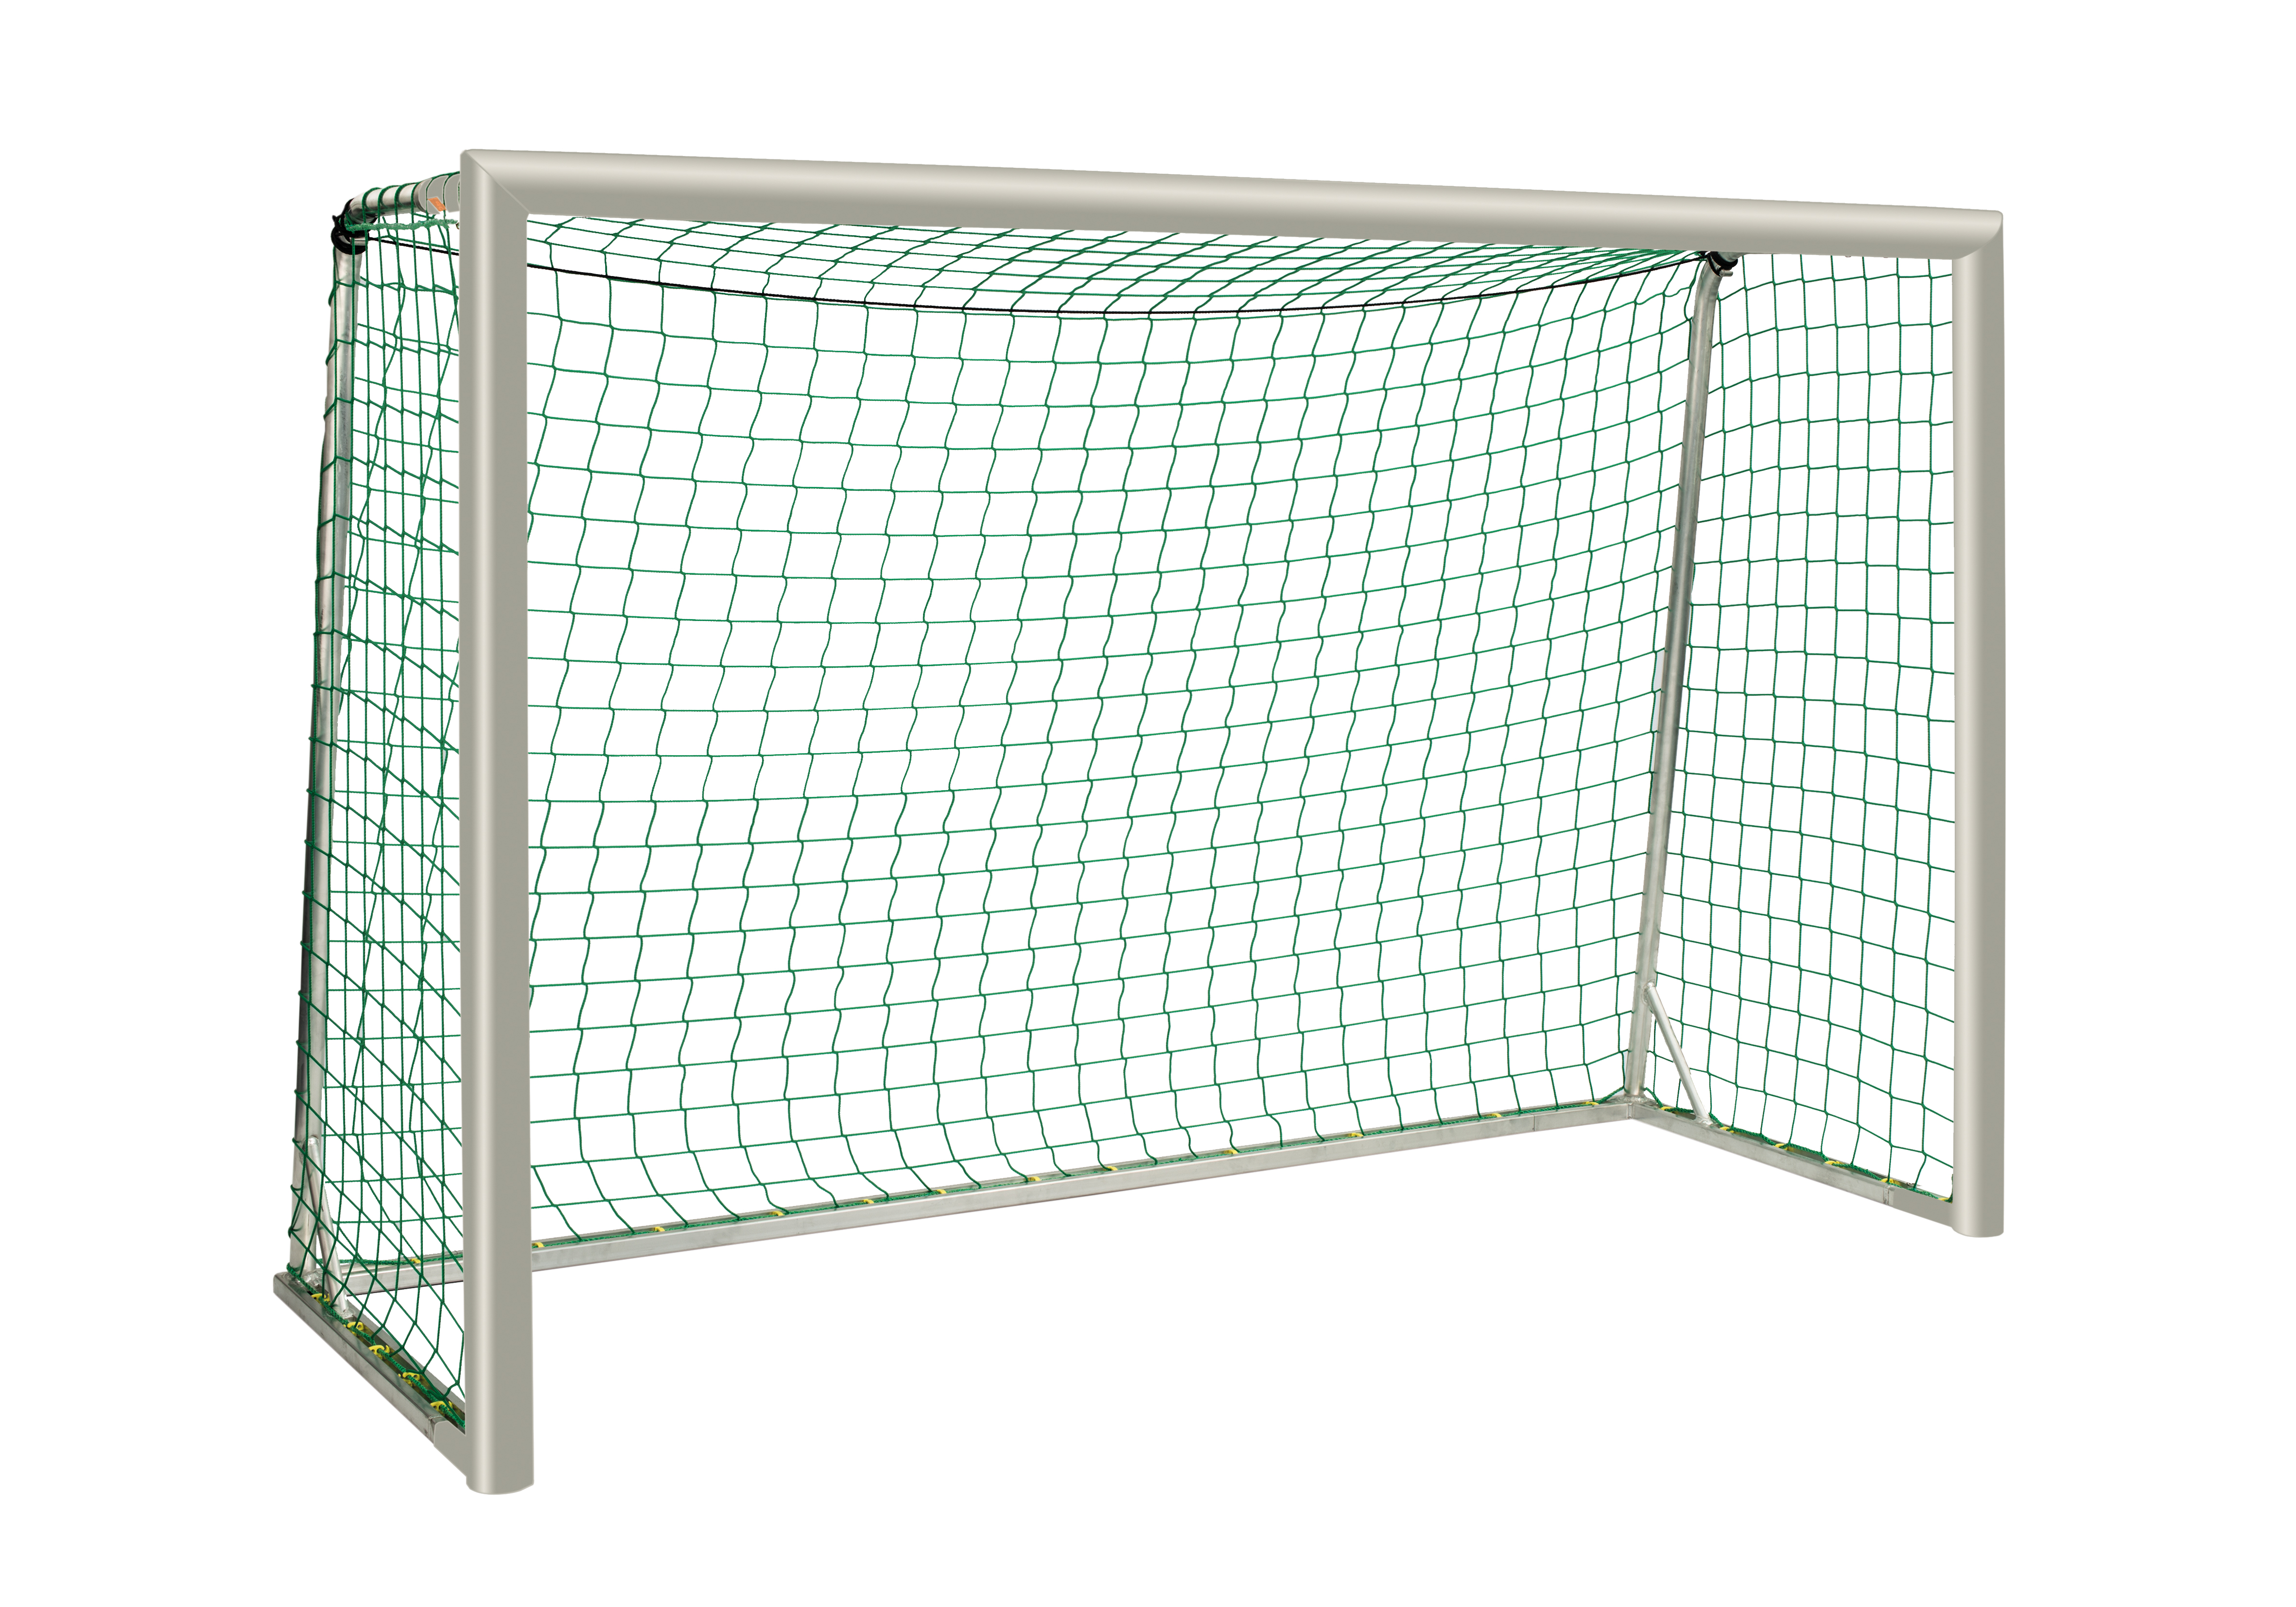 Youth Soccer Goal Court Royal 3 x 2 m, completely welded, in 4 parts